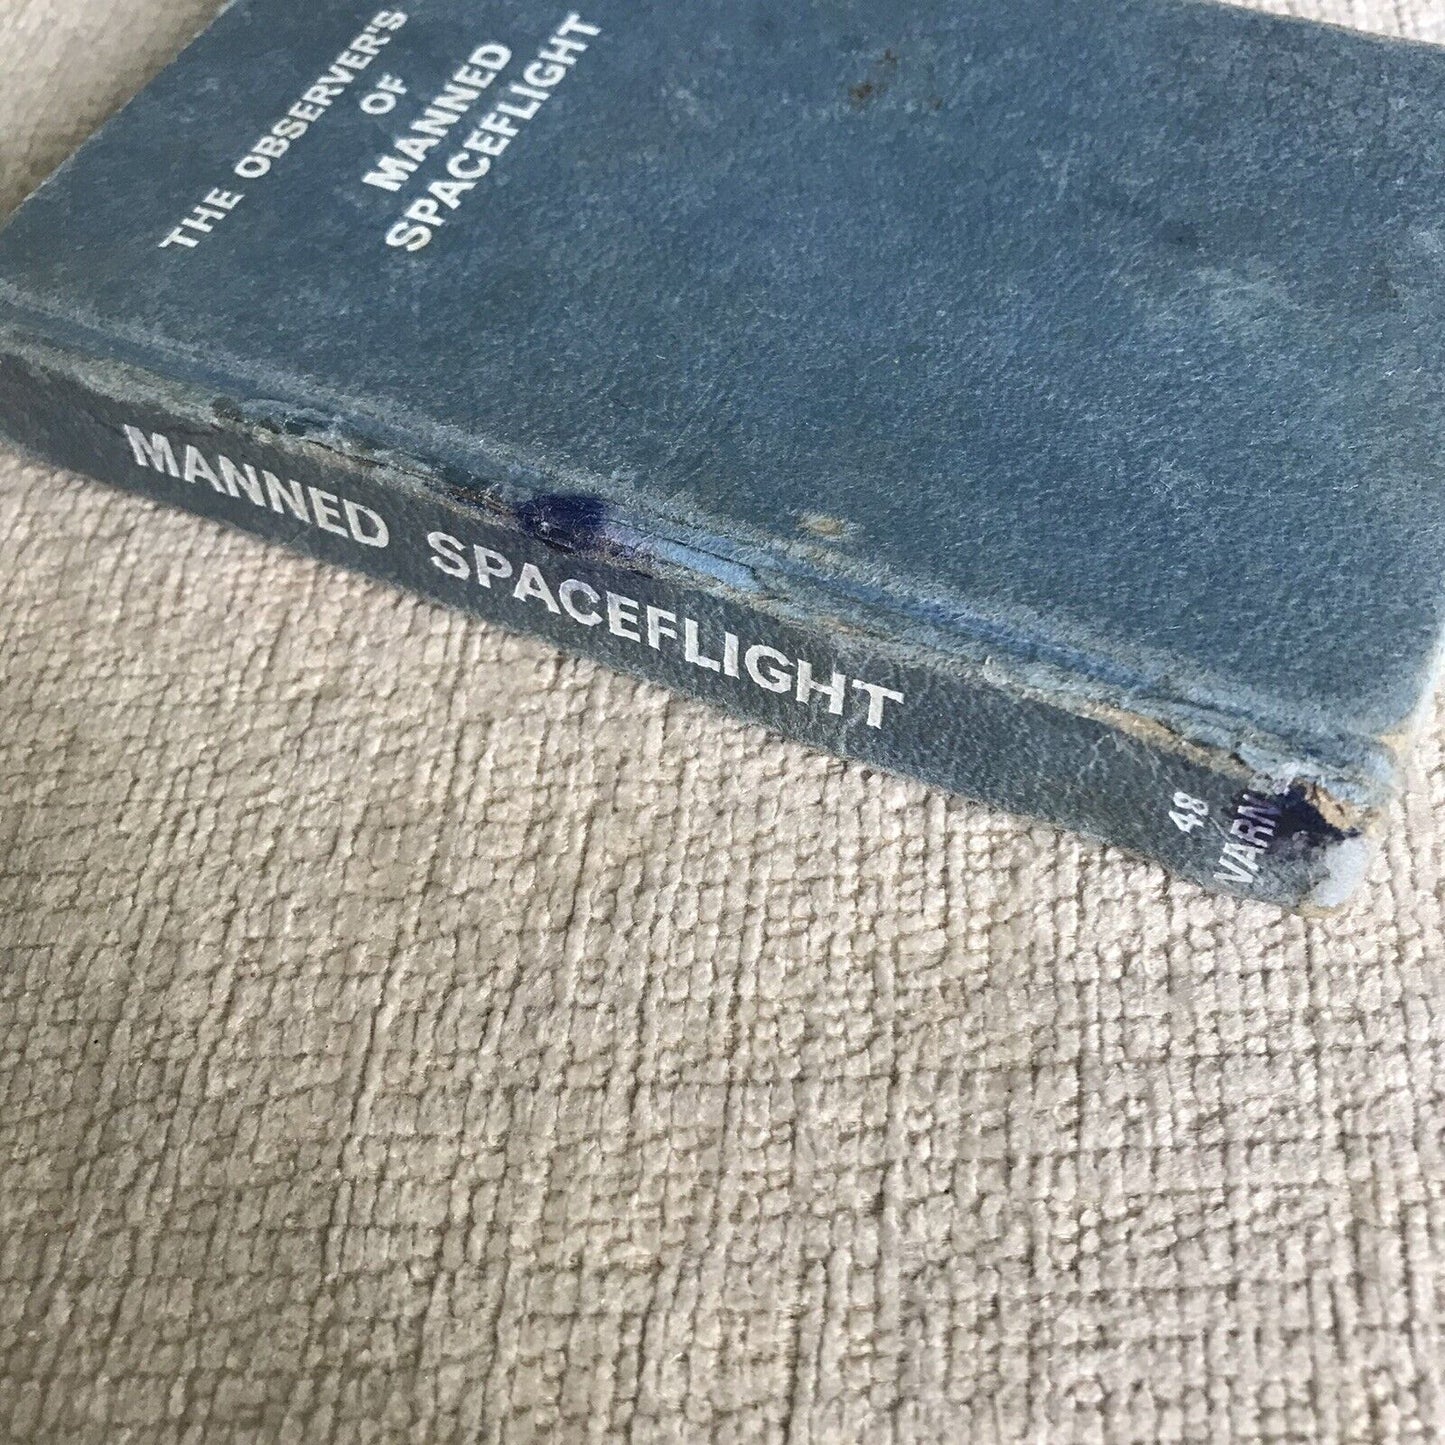 1972*1st*Observer's Book of Manned Space Flight by Reginald Turnill